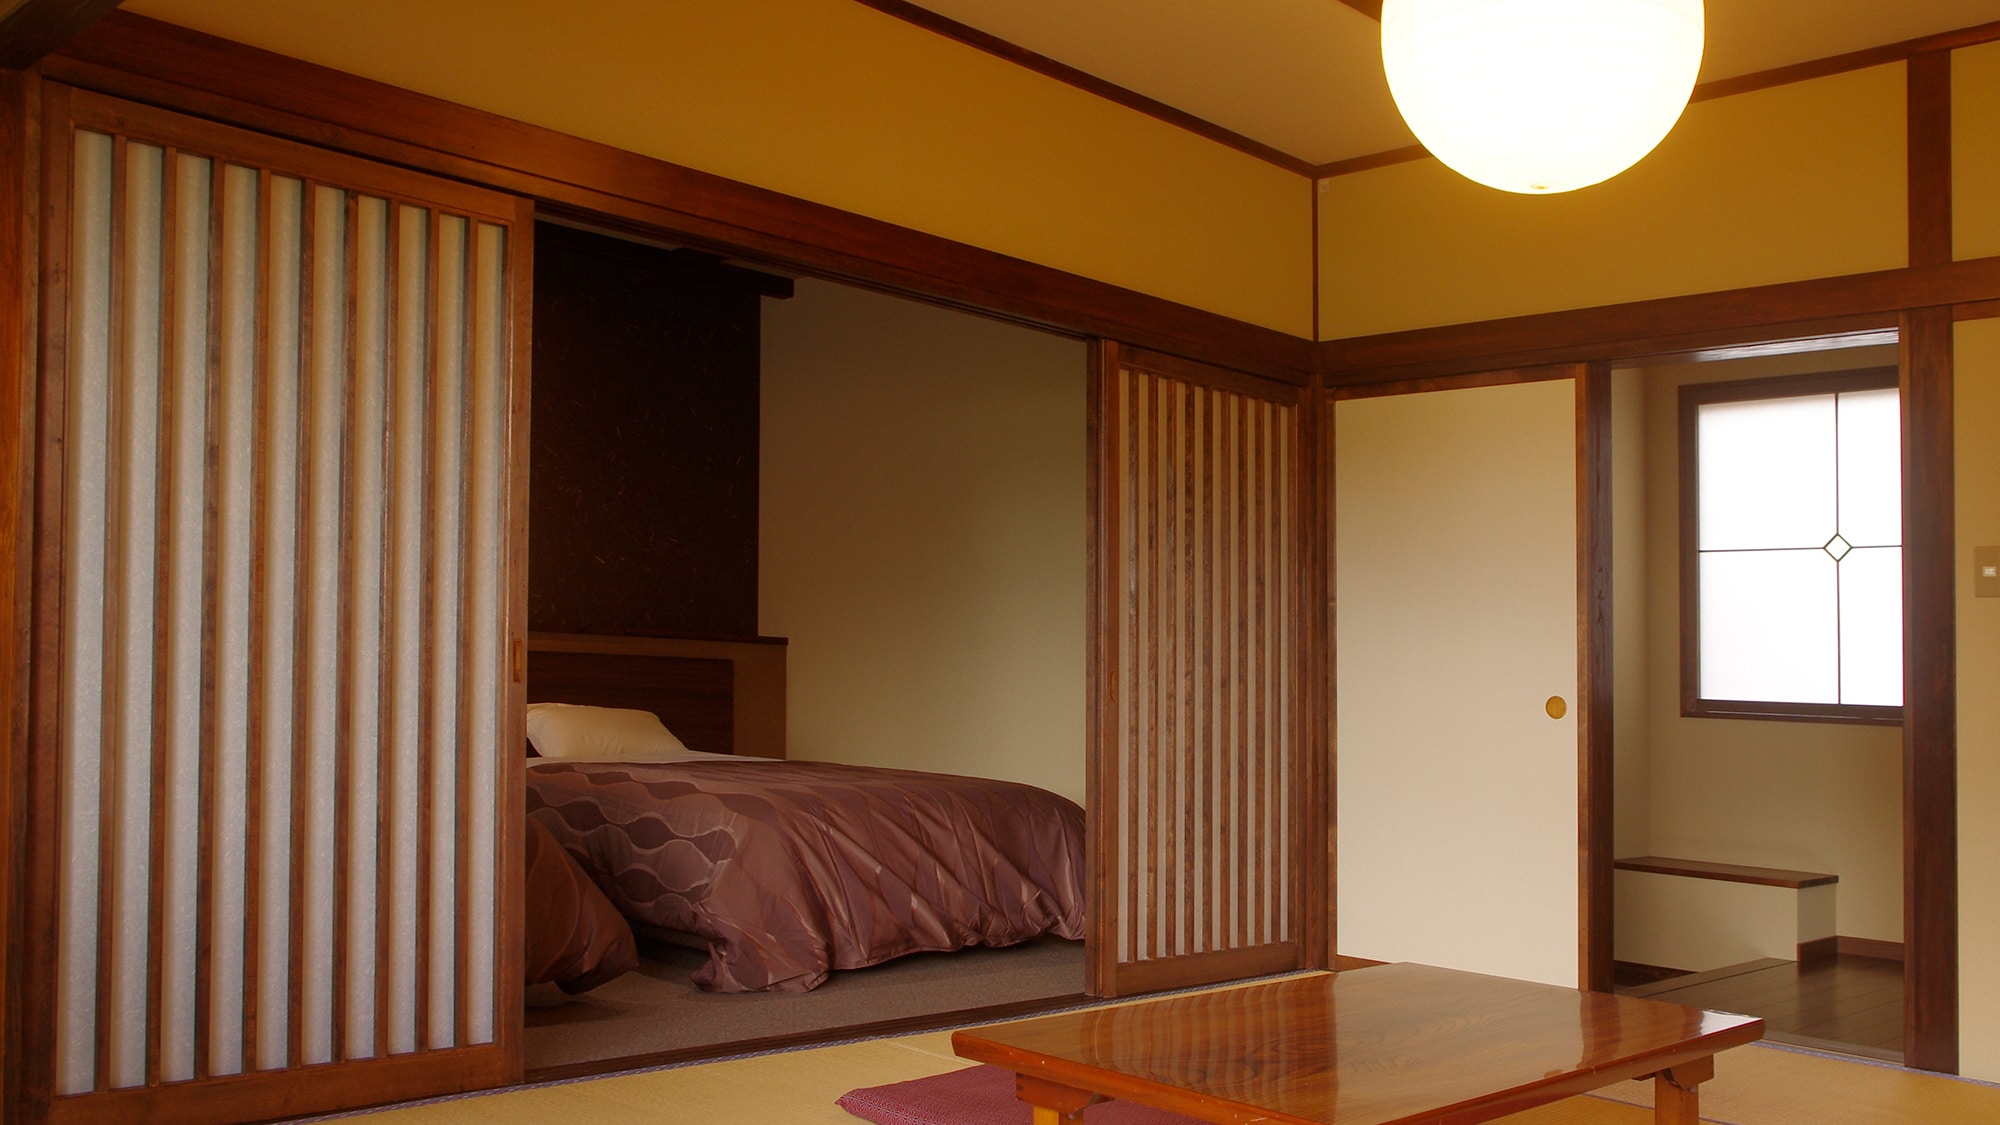 * Japanese and Western rooms